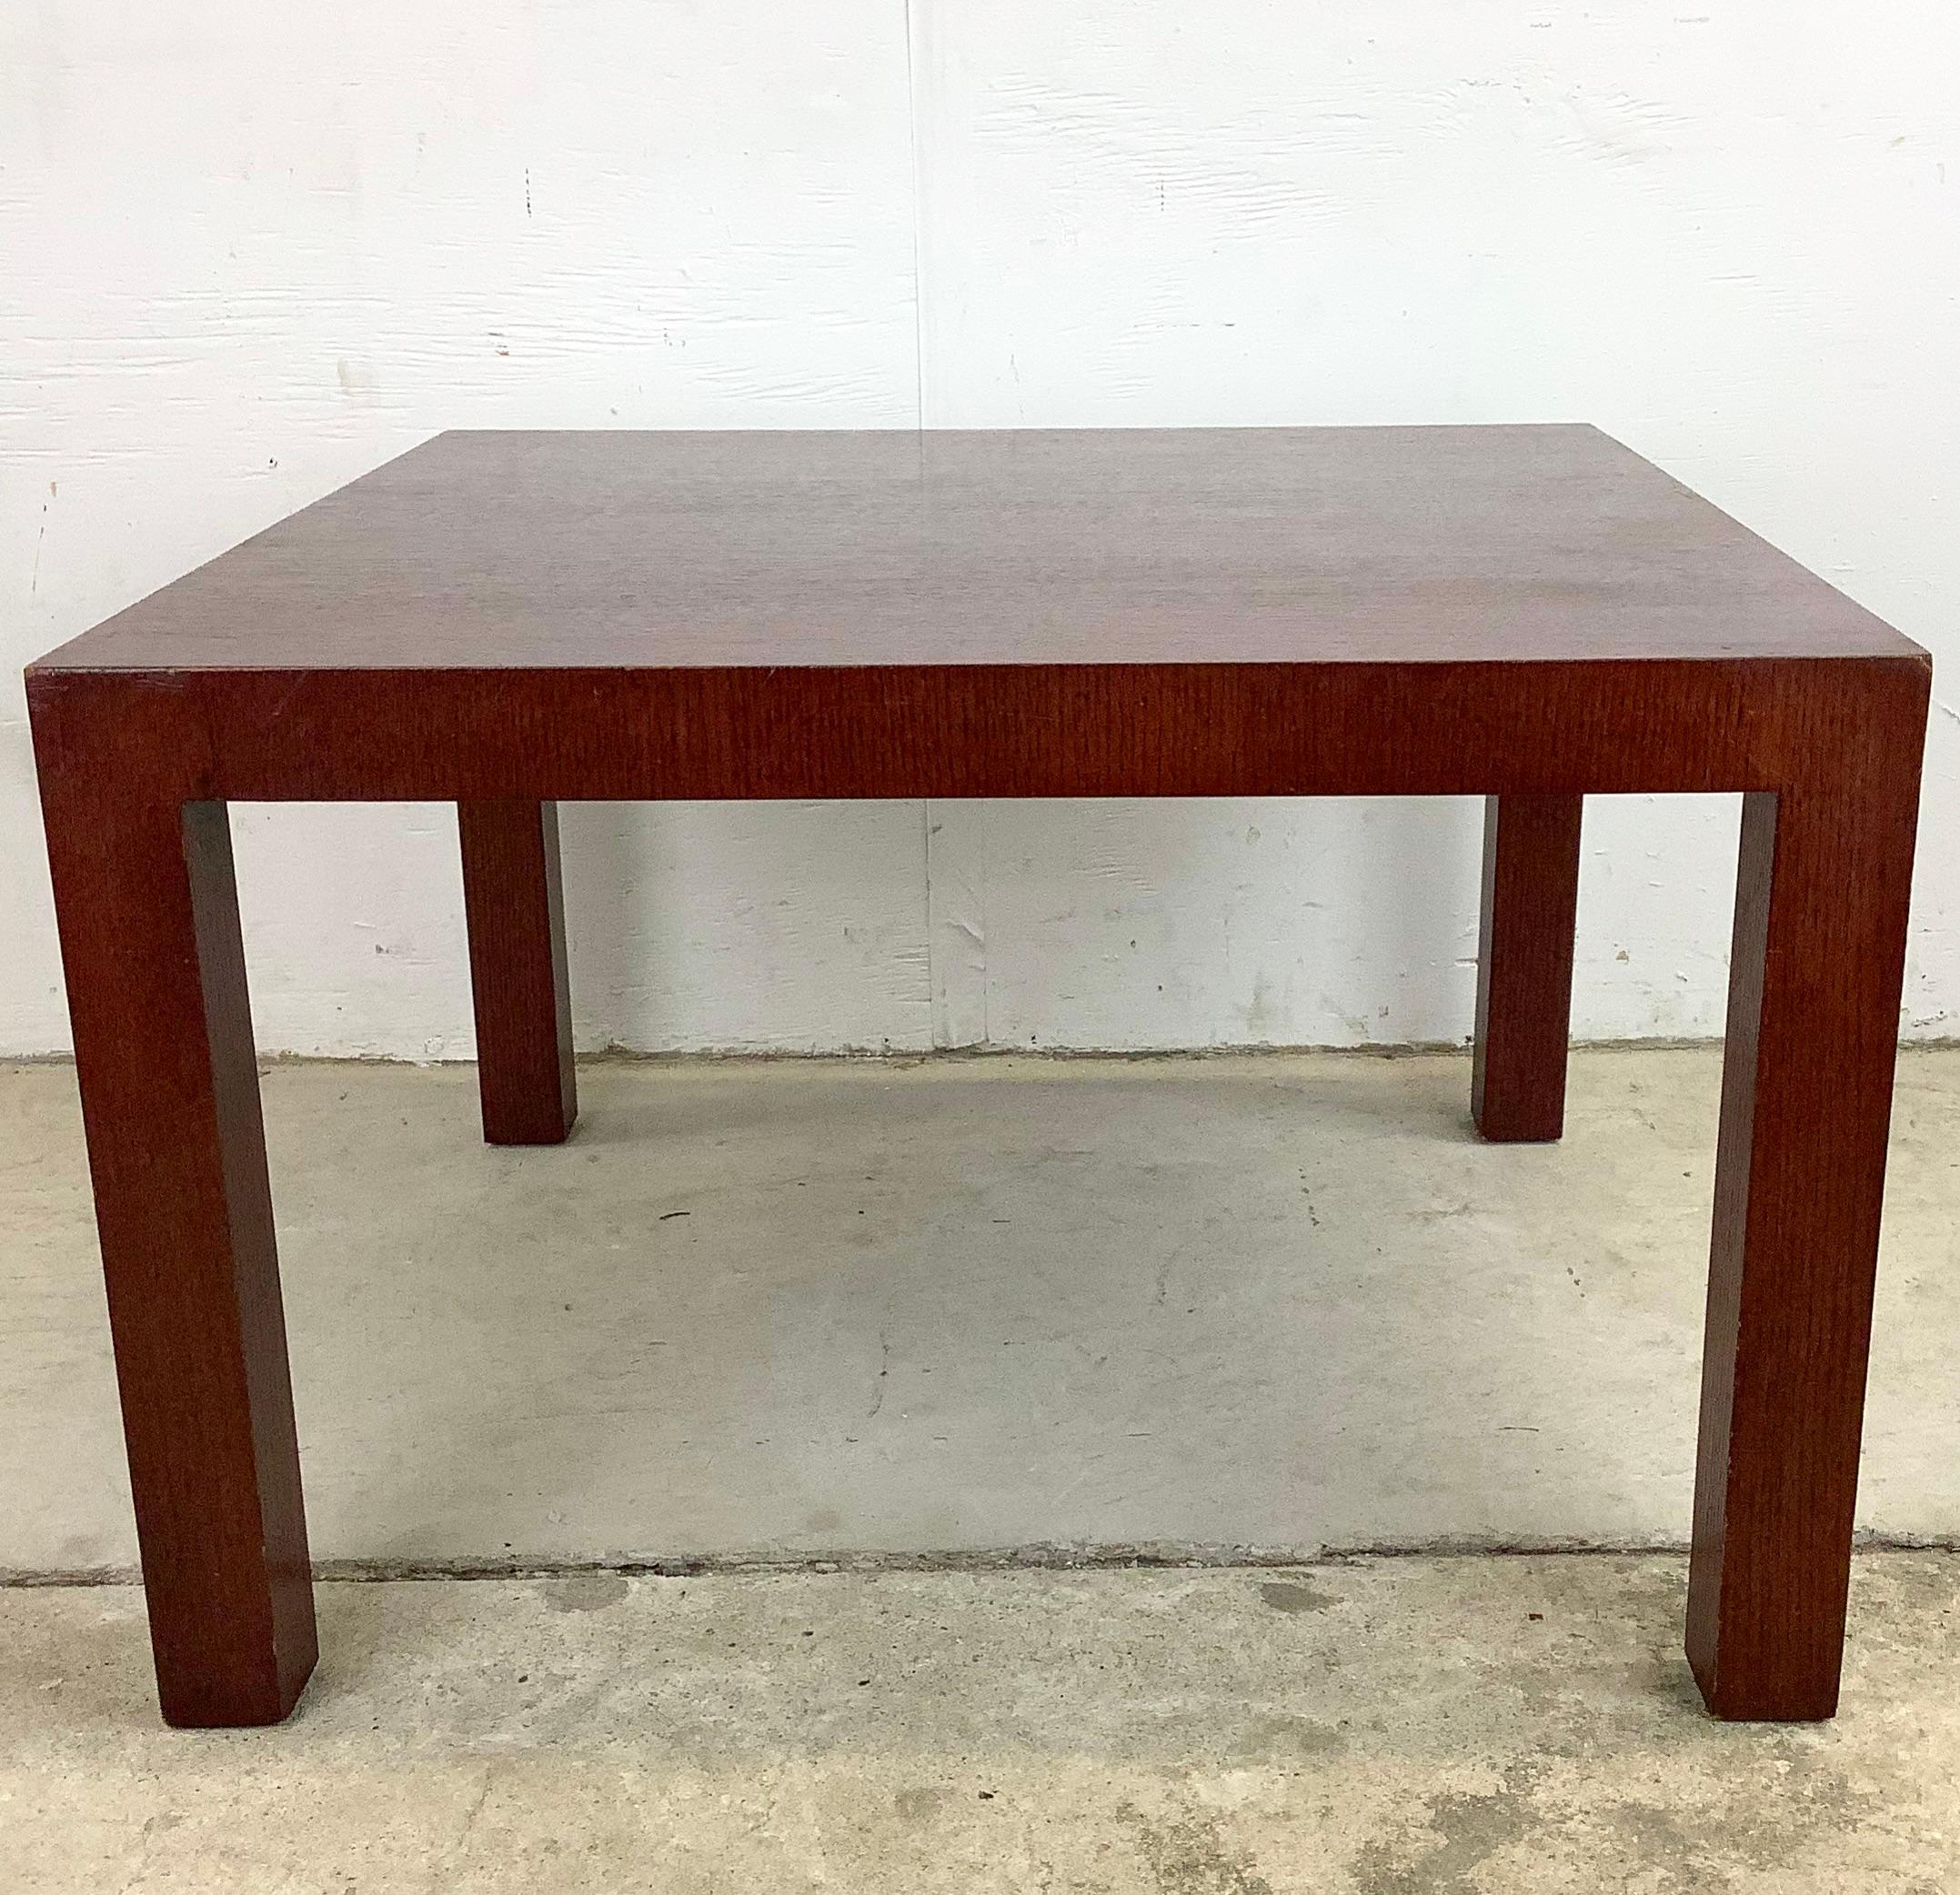 The simple modern design of this Knoll side table is showcased in the clean modern lines and quality wood choice. Heavy construction and mcm style make this the perfect addition to any interior in need of a sofa side table or lamp table. Makers mark